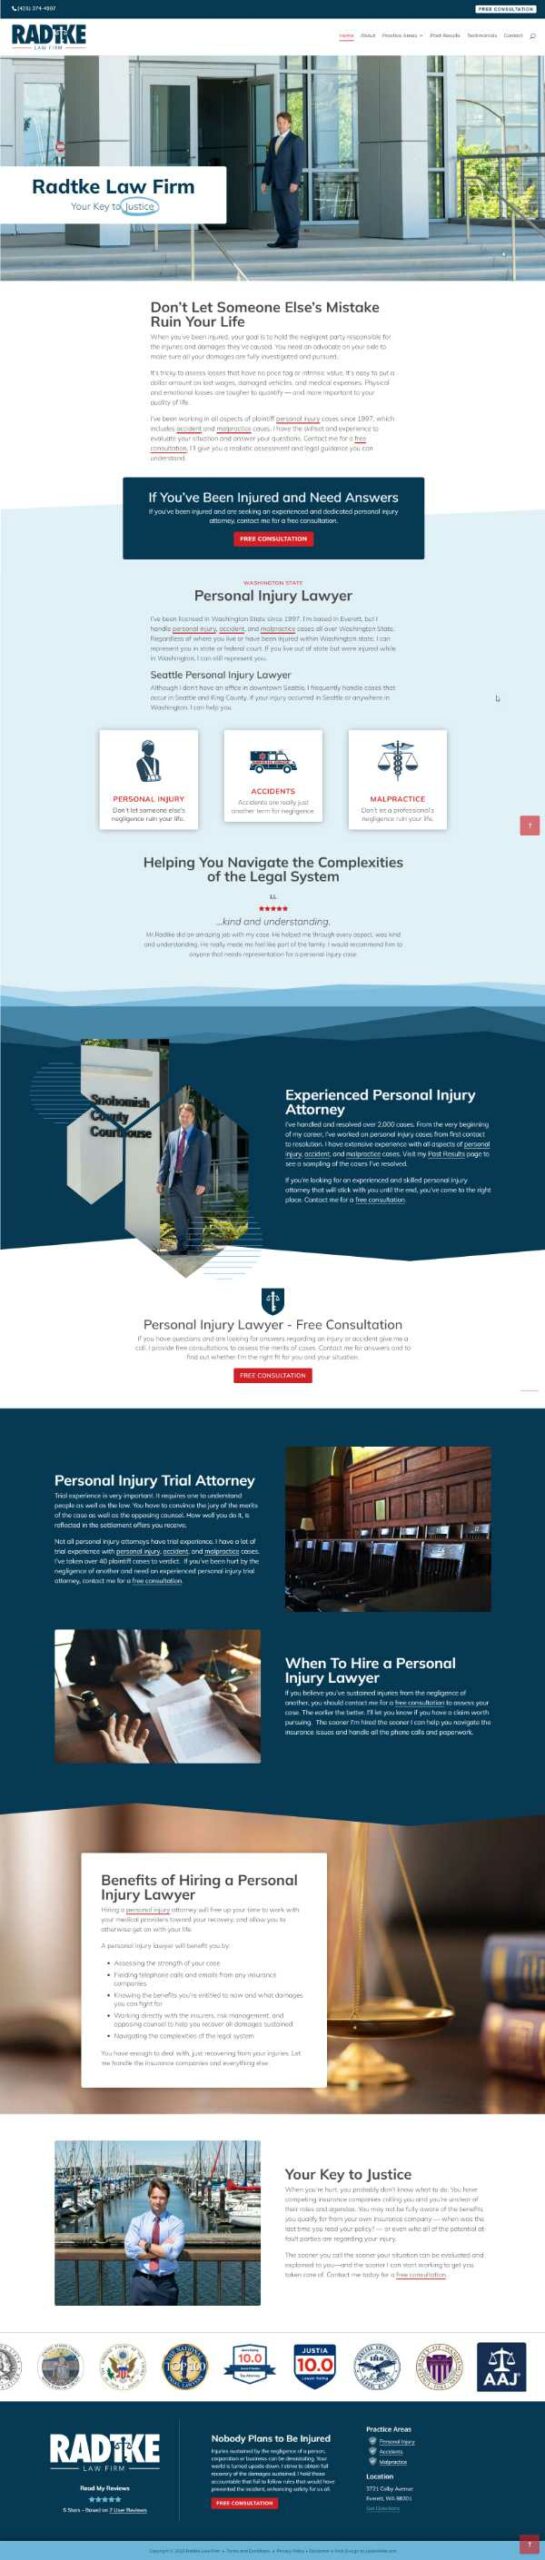 Full page screenshot of Radtke Law Firm's Home page